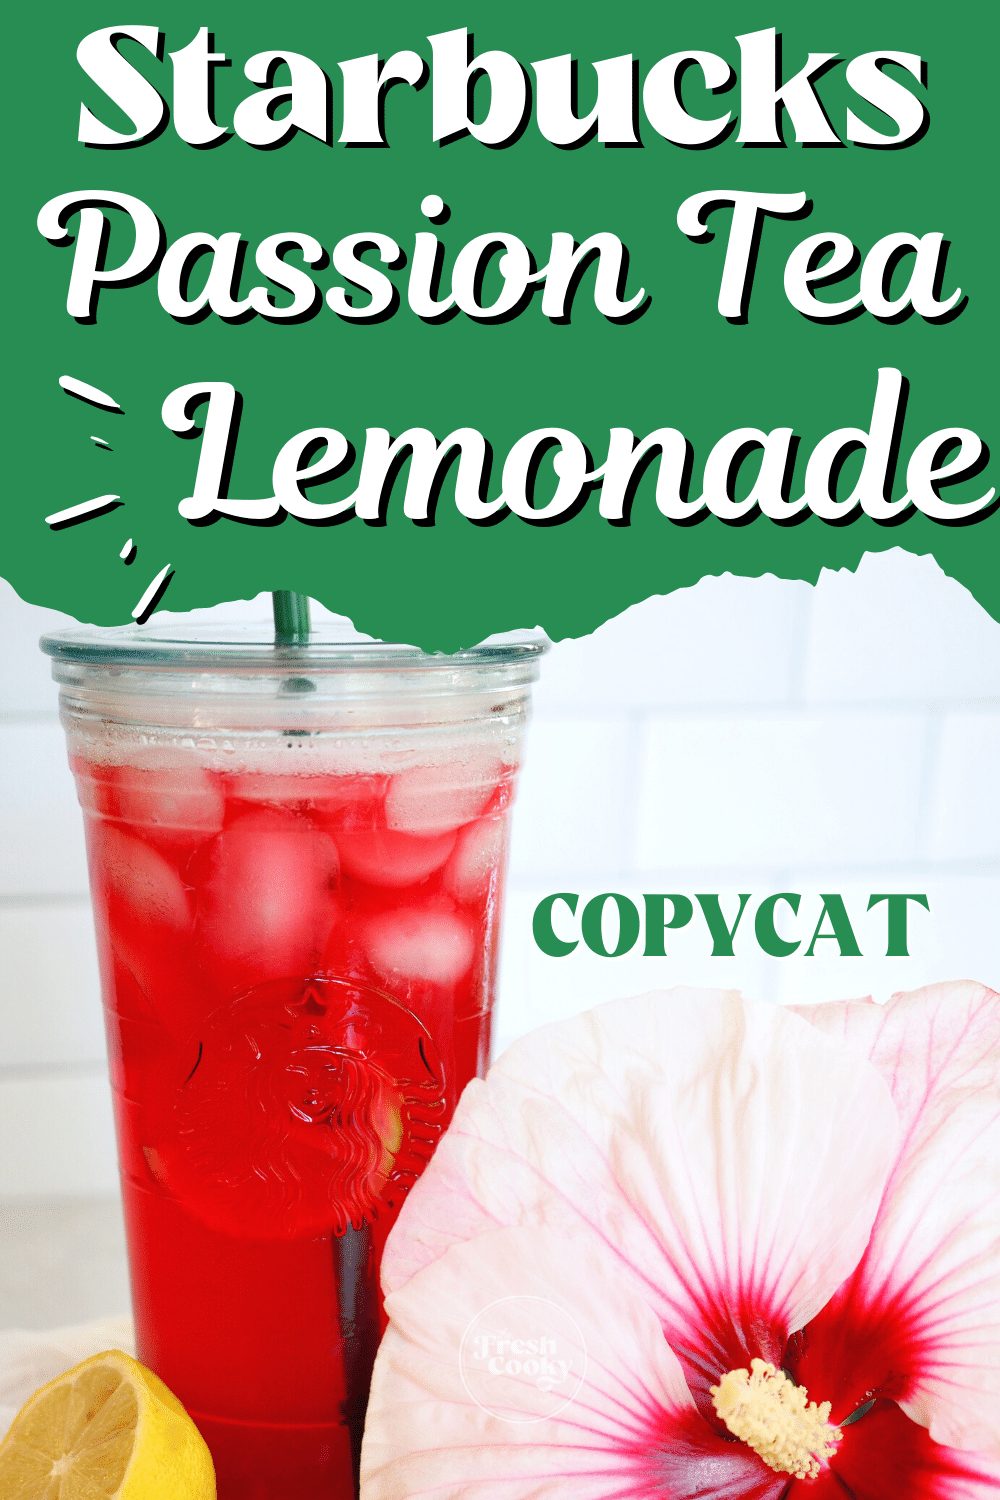 Starbucks Passion Tea Lemonade Copycat Recipe with glass filled with bright pink passion iced tea with hibiscus flower nearby.